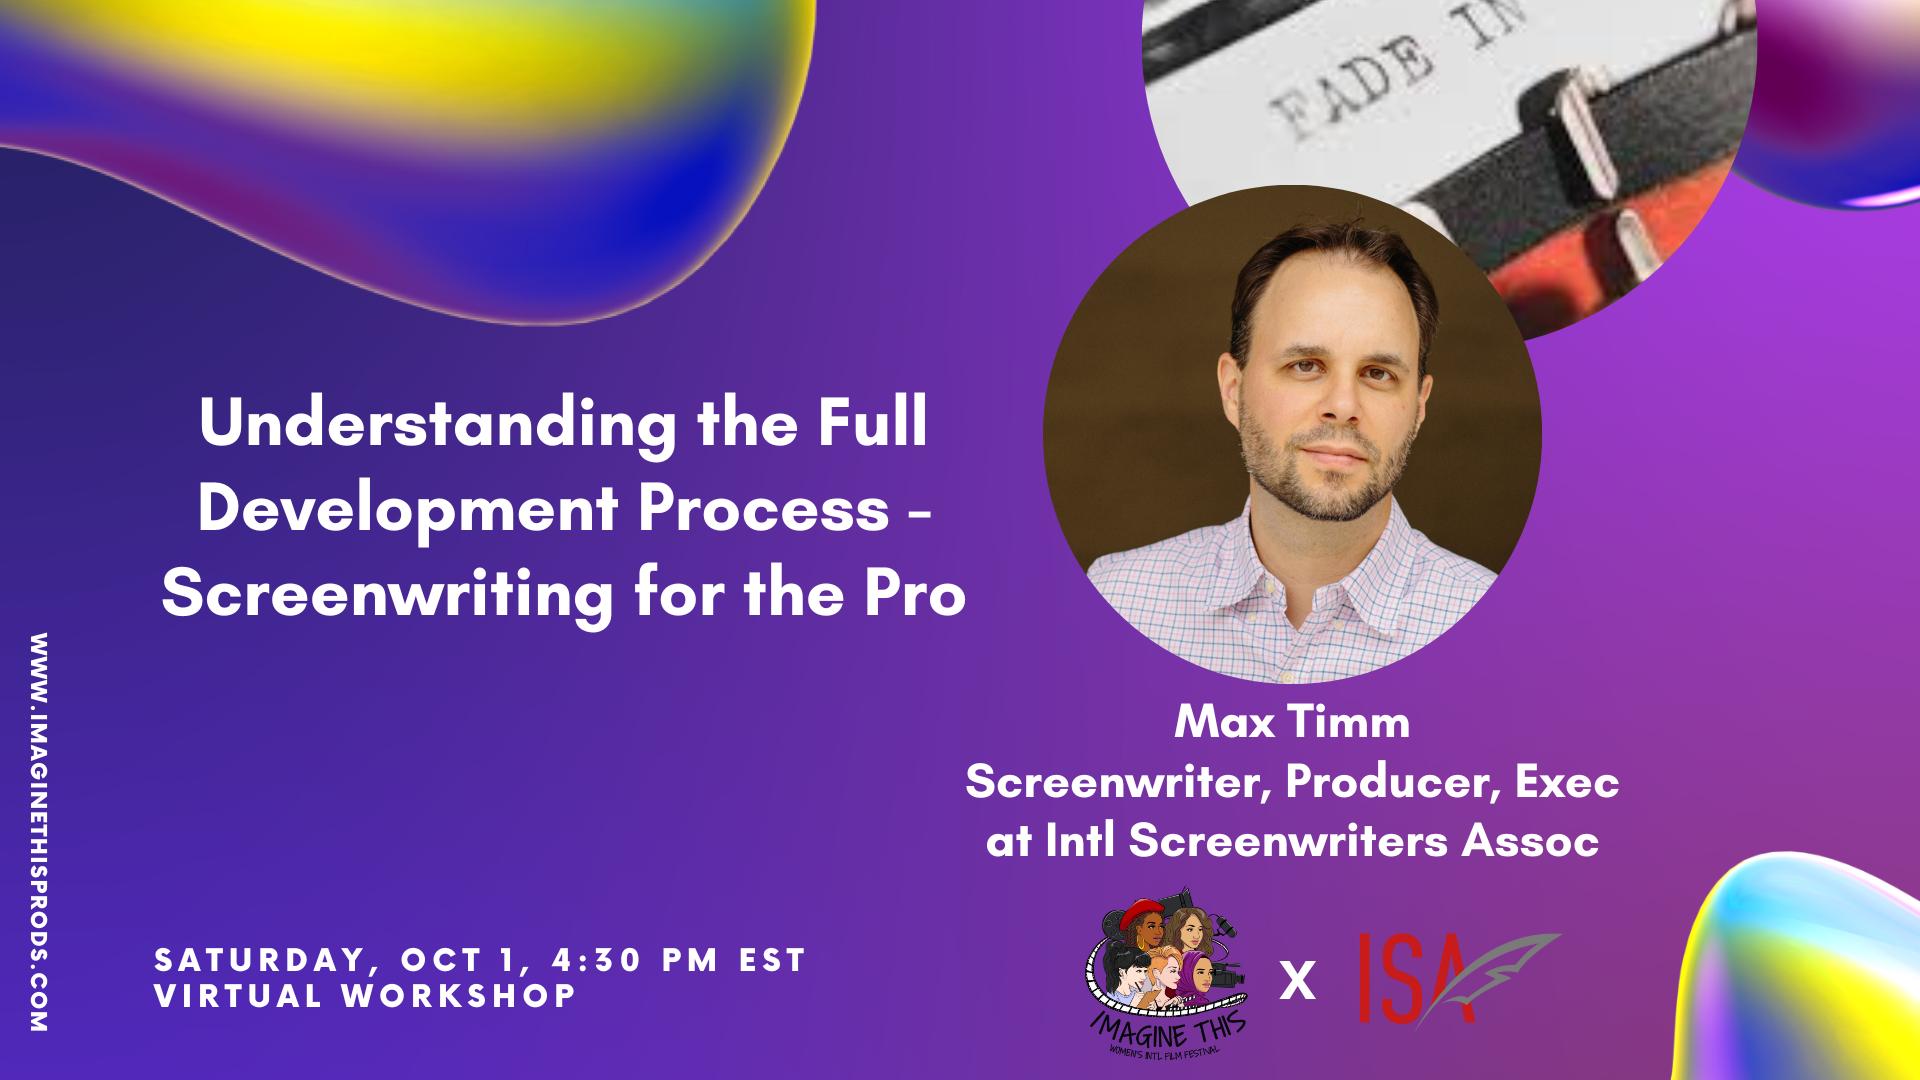 Title: Understanding the Full Development Process - Screenwriting for the Pro